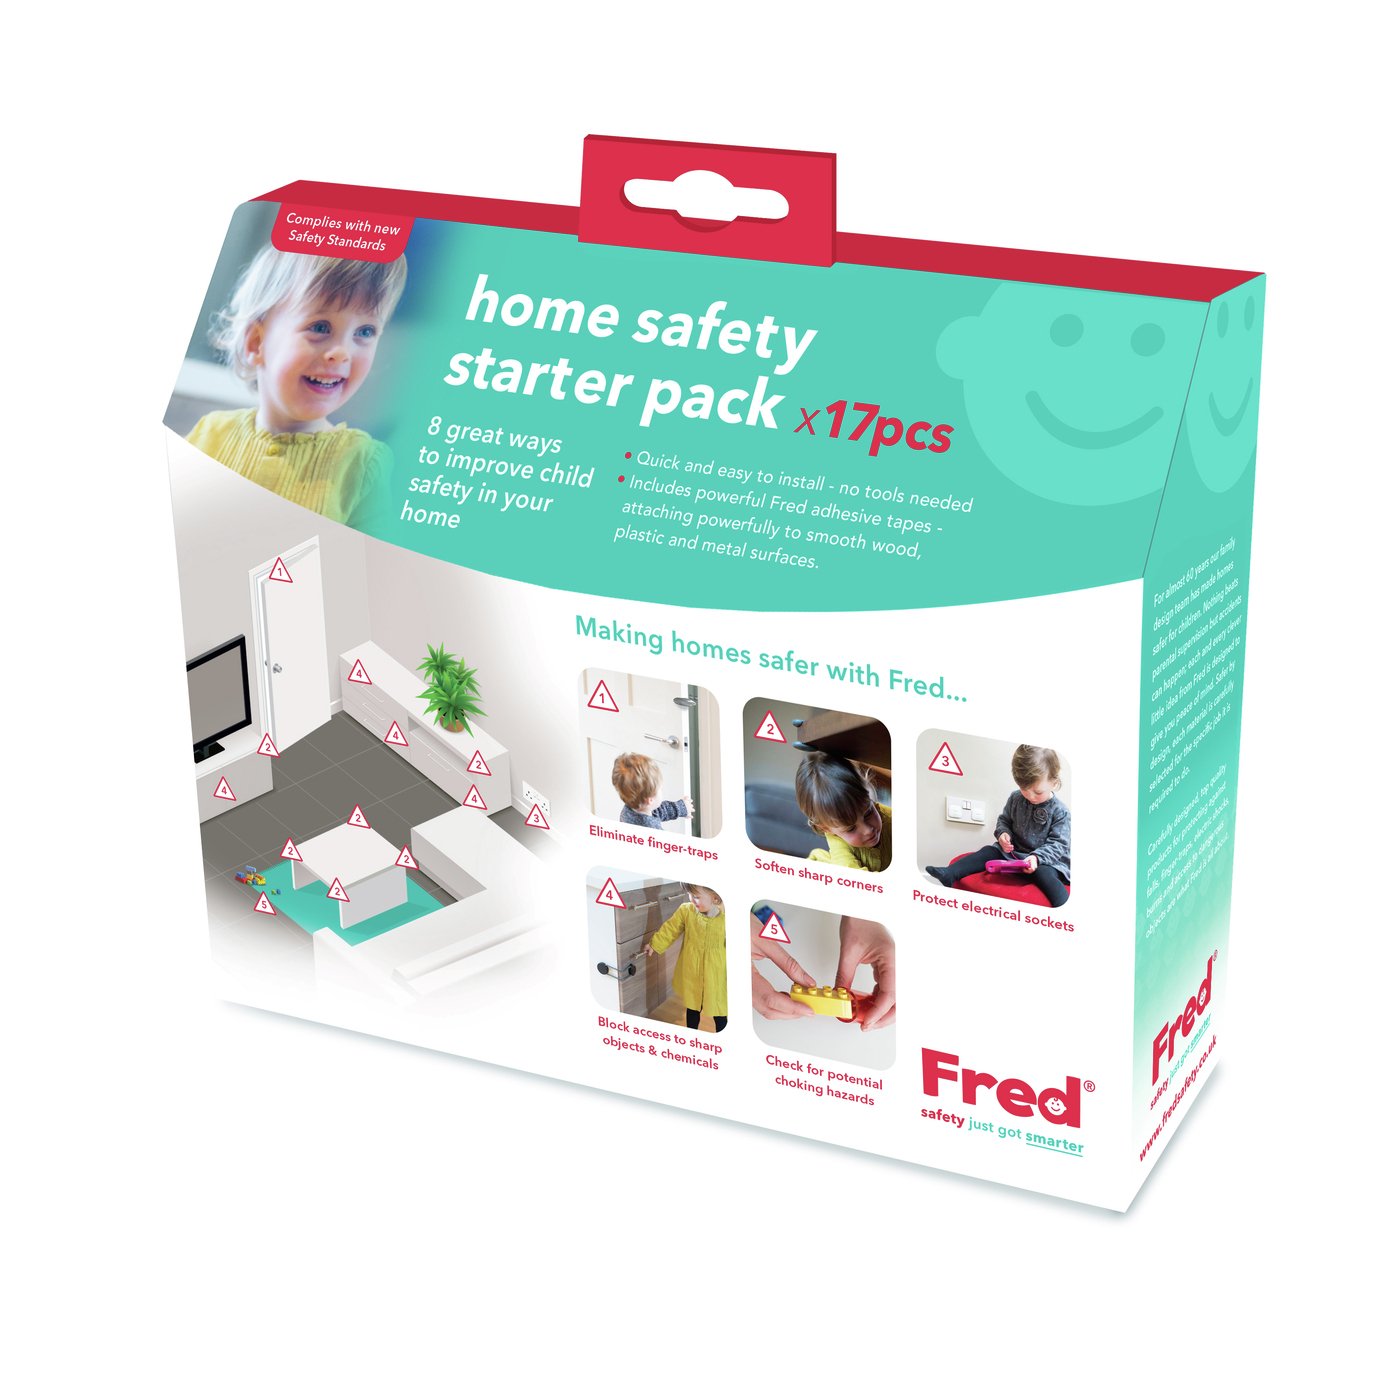 Fred Home Safety Starter Pack Review